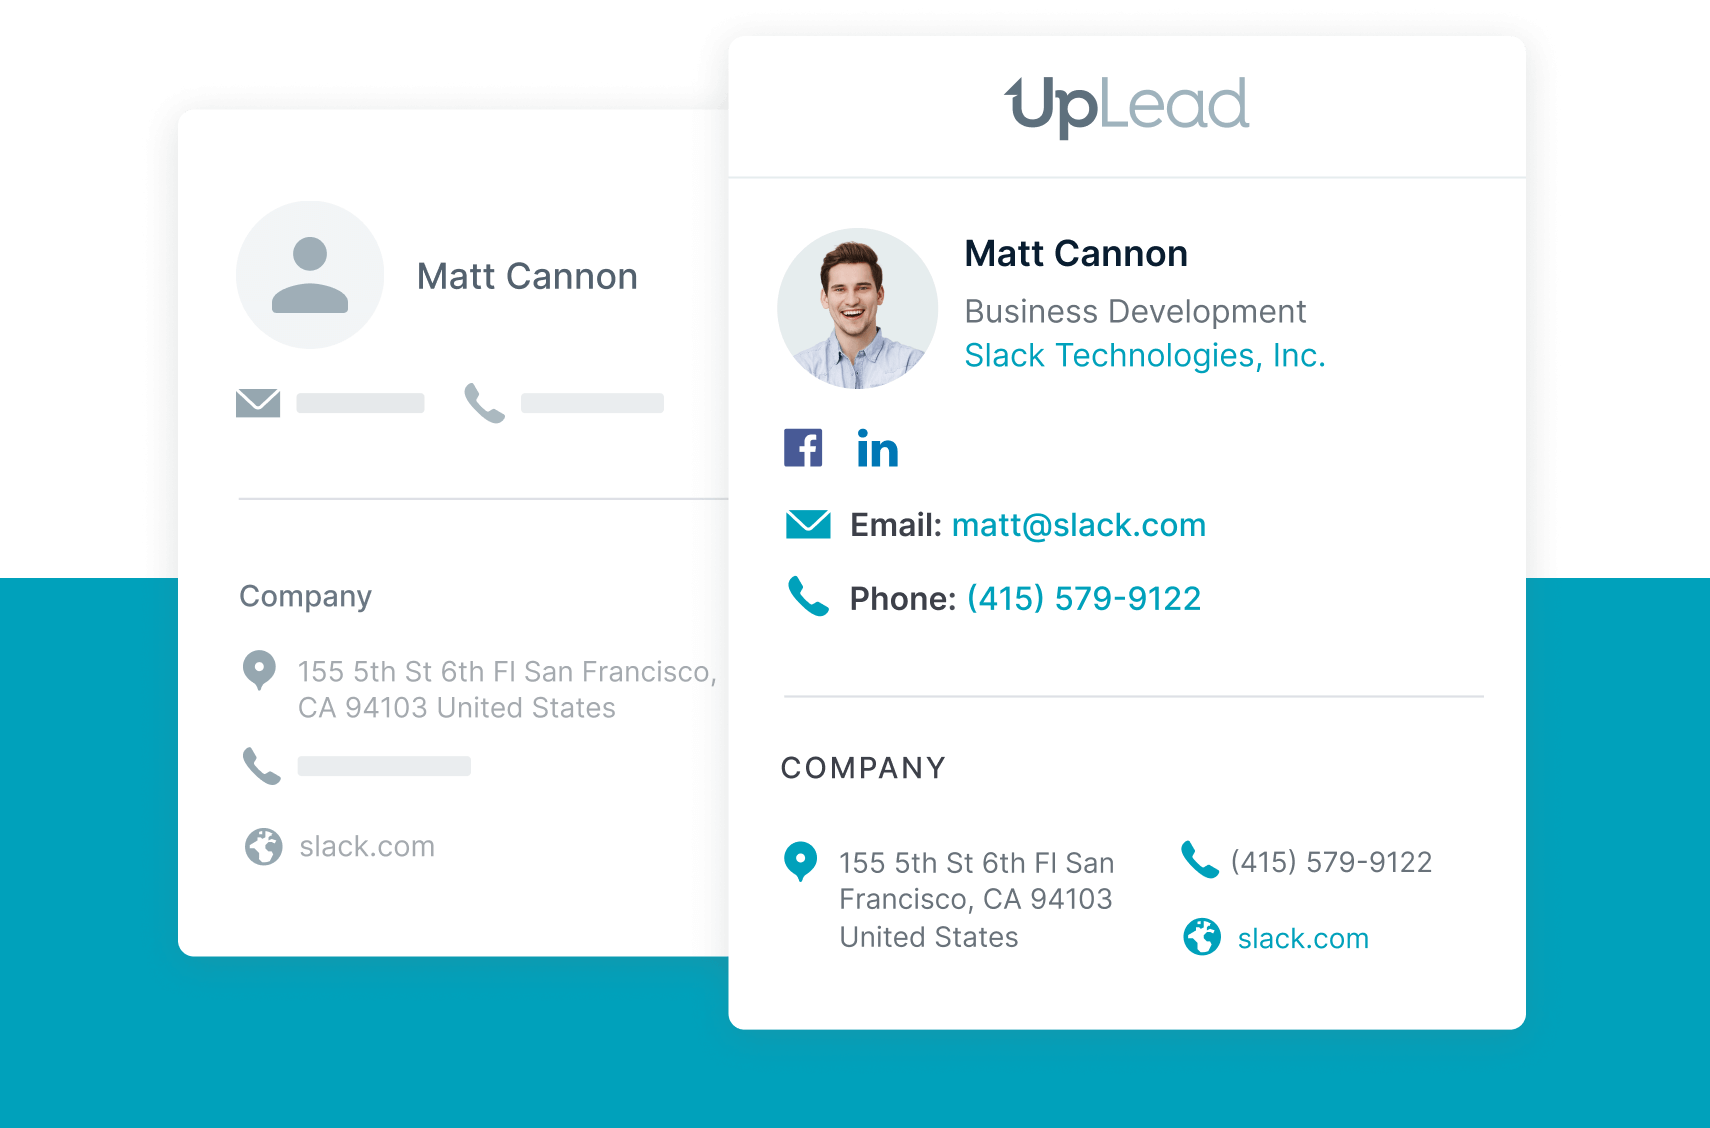 UpLead is one of the best lead generation tools on the market